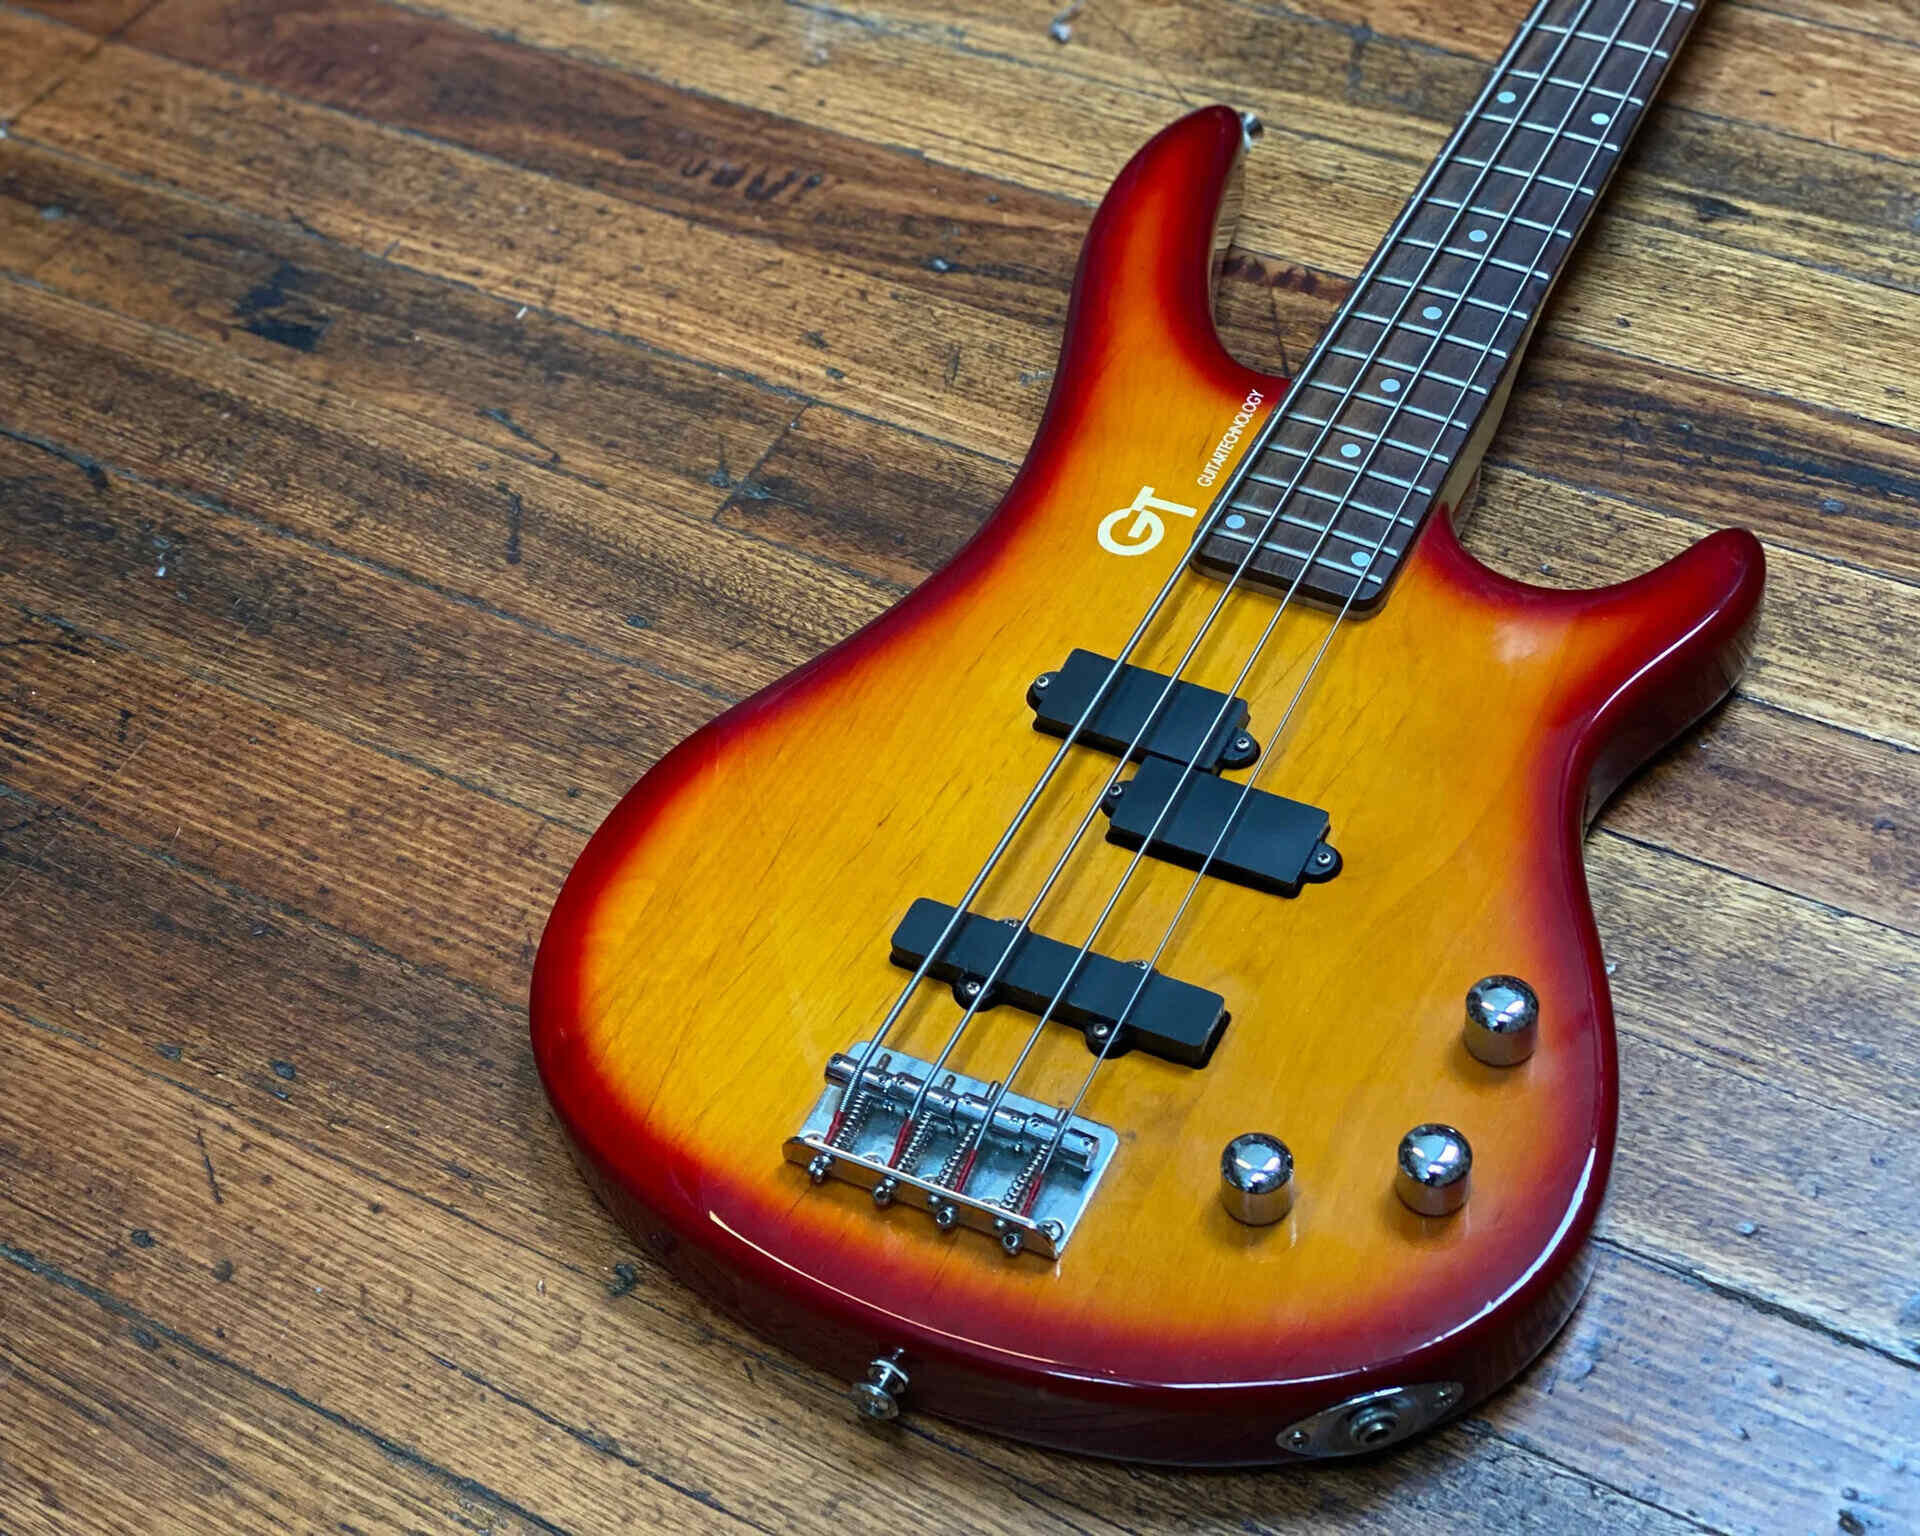 Bass Guitar Review: Unbiased Analysis and Recommendations